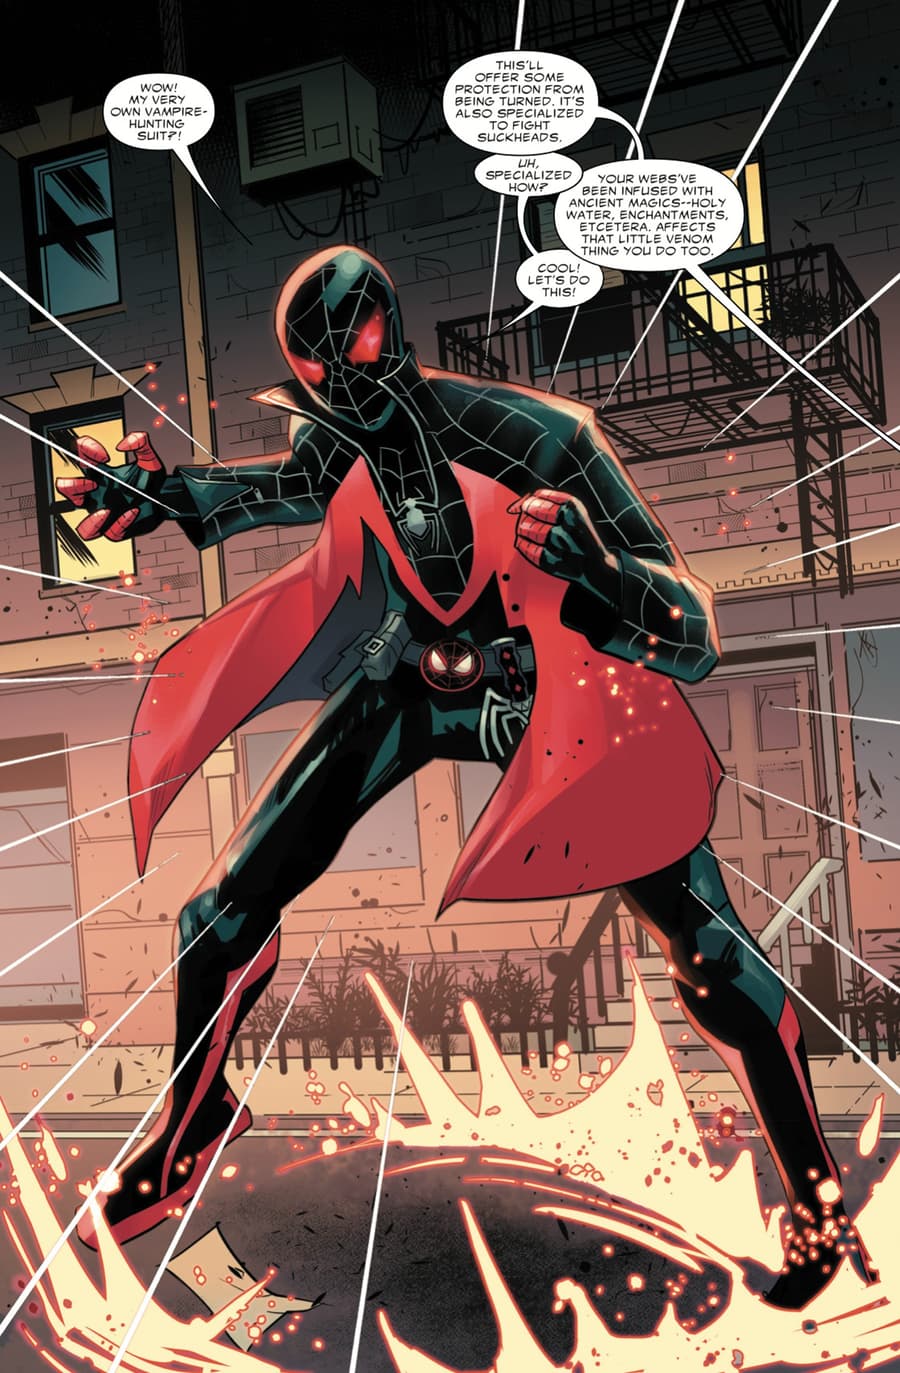 MILES MORALES: SPIDER-MAN (2022) #11 page by Cody Ziglar and Federica Mancin